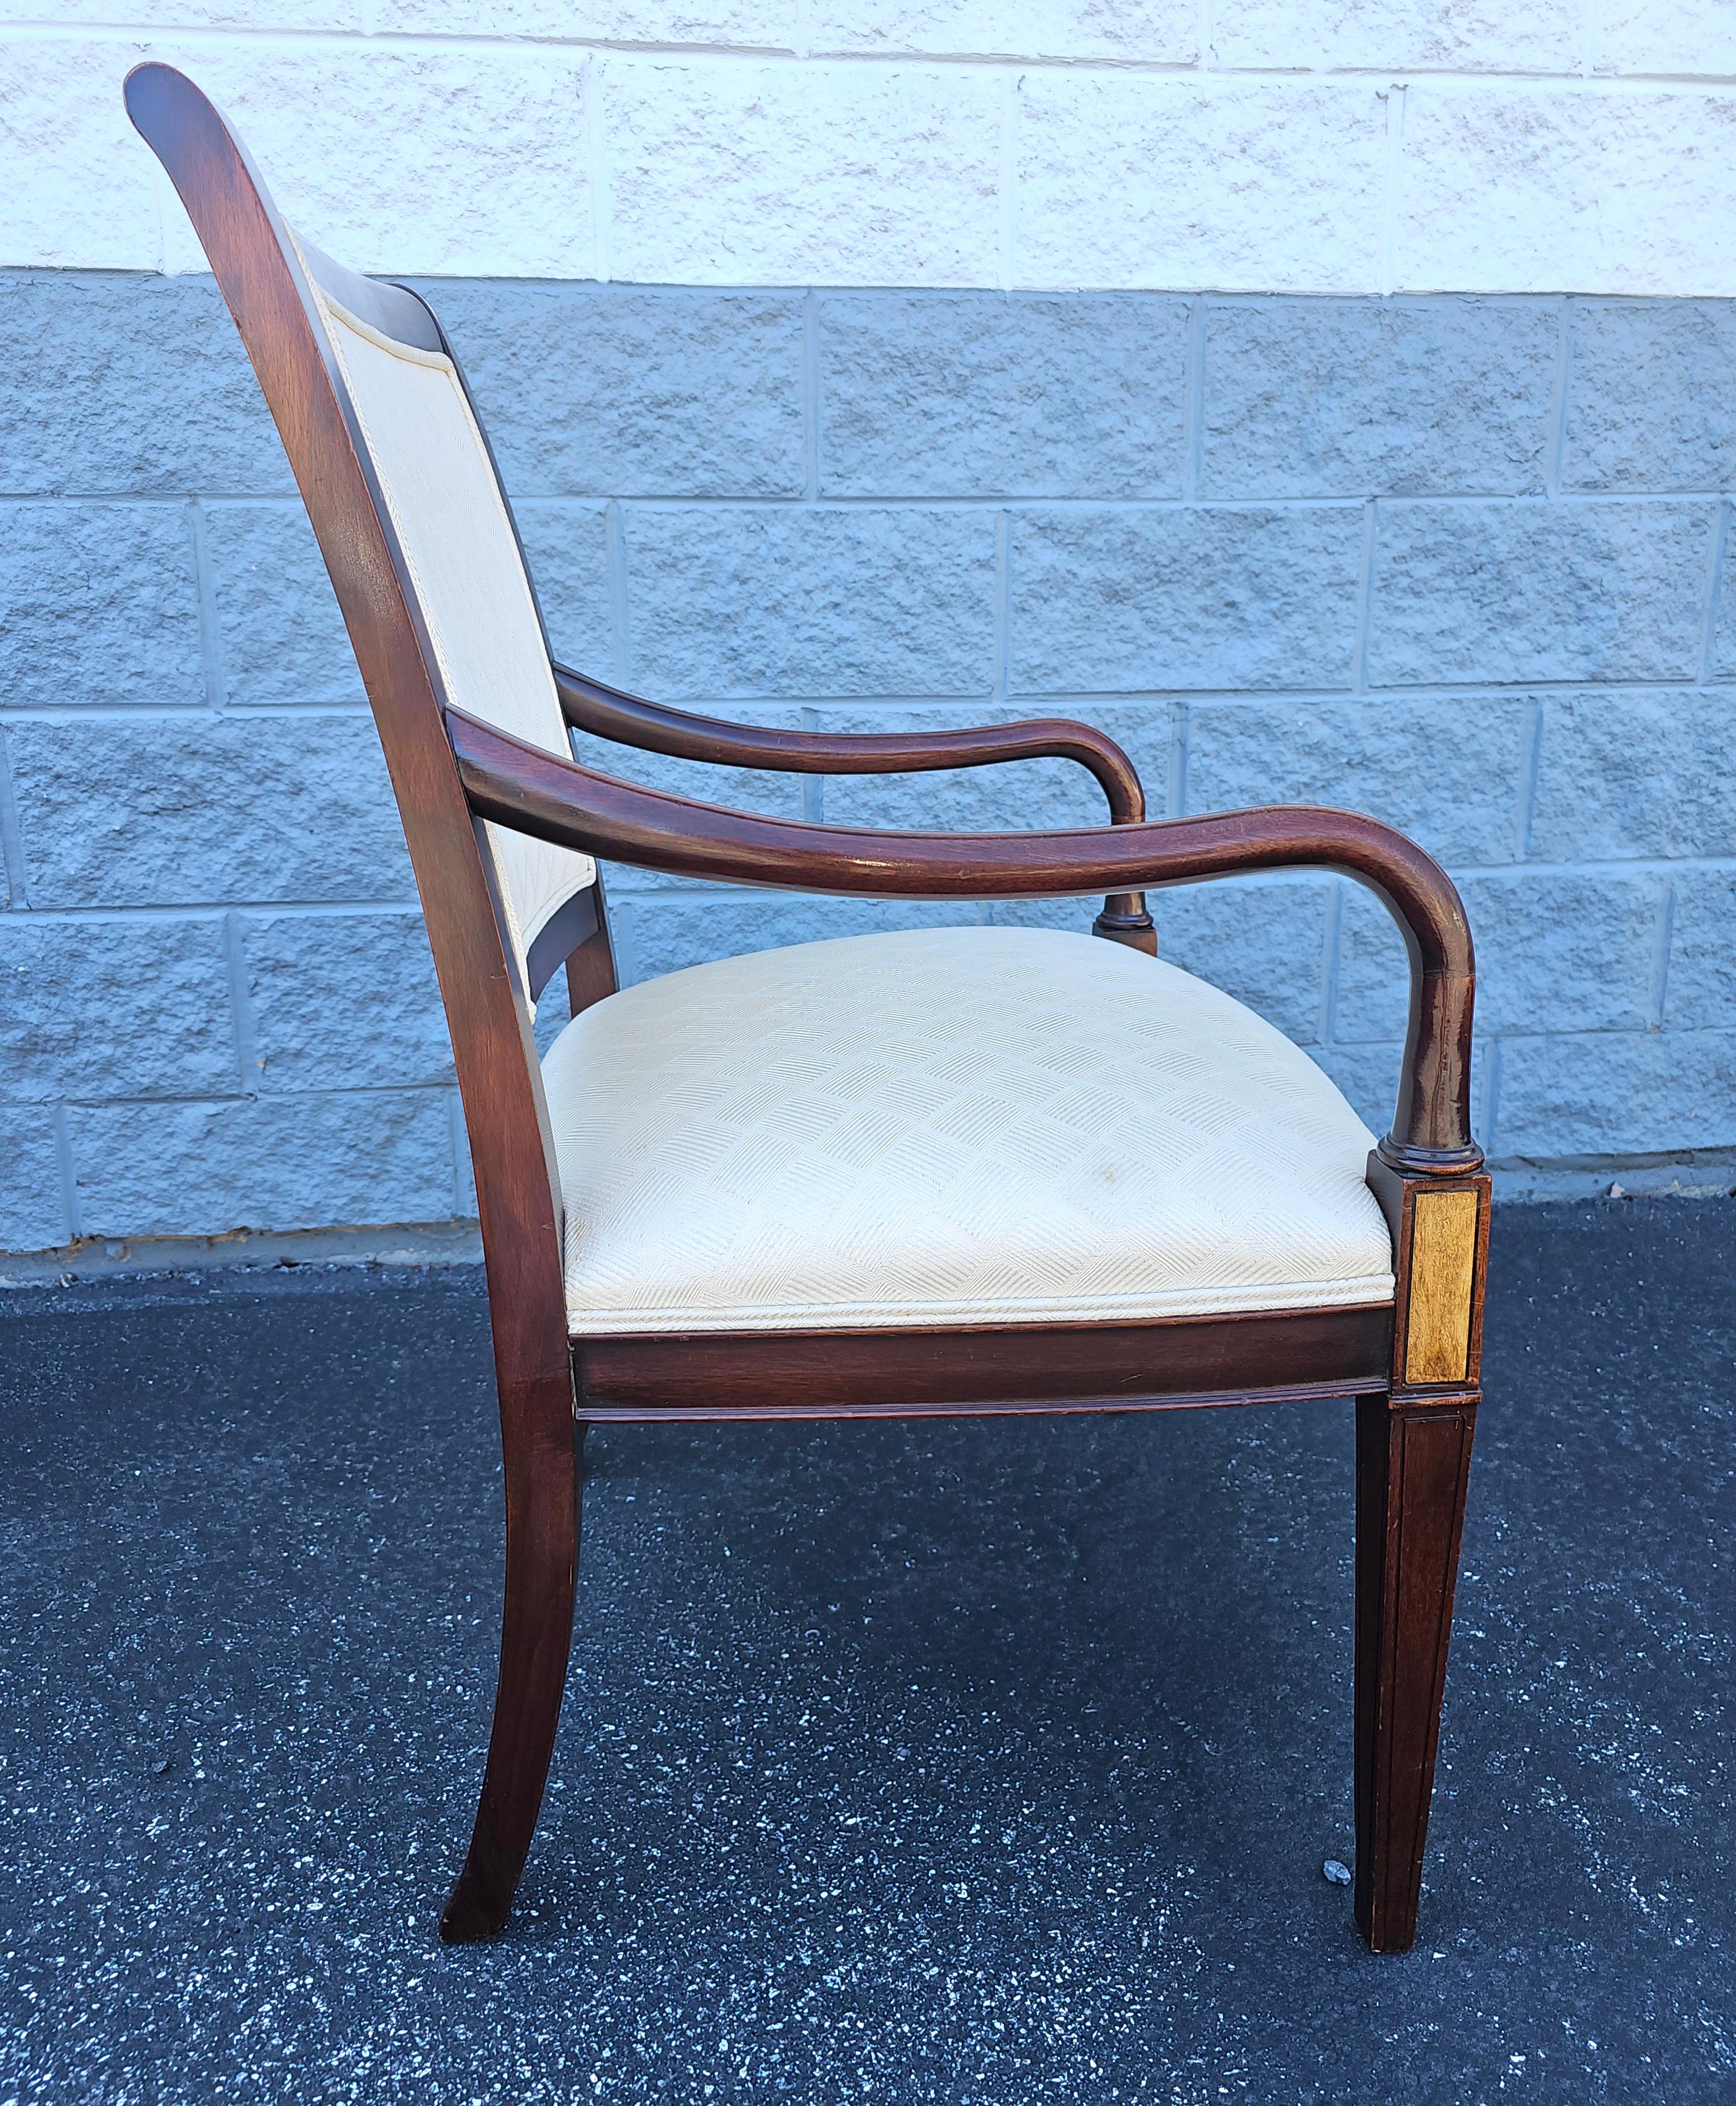 A late 20th Century Hickory Chair Sheraton Style Mahogany Inlaid and Upholstered Arm Chair
Measures 25